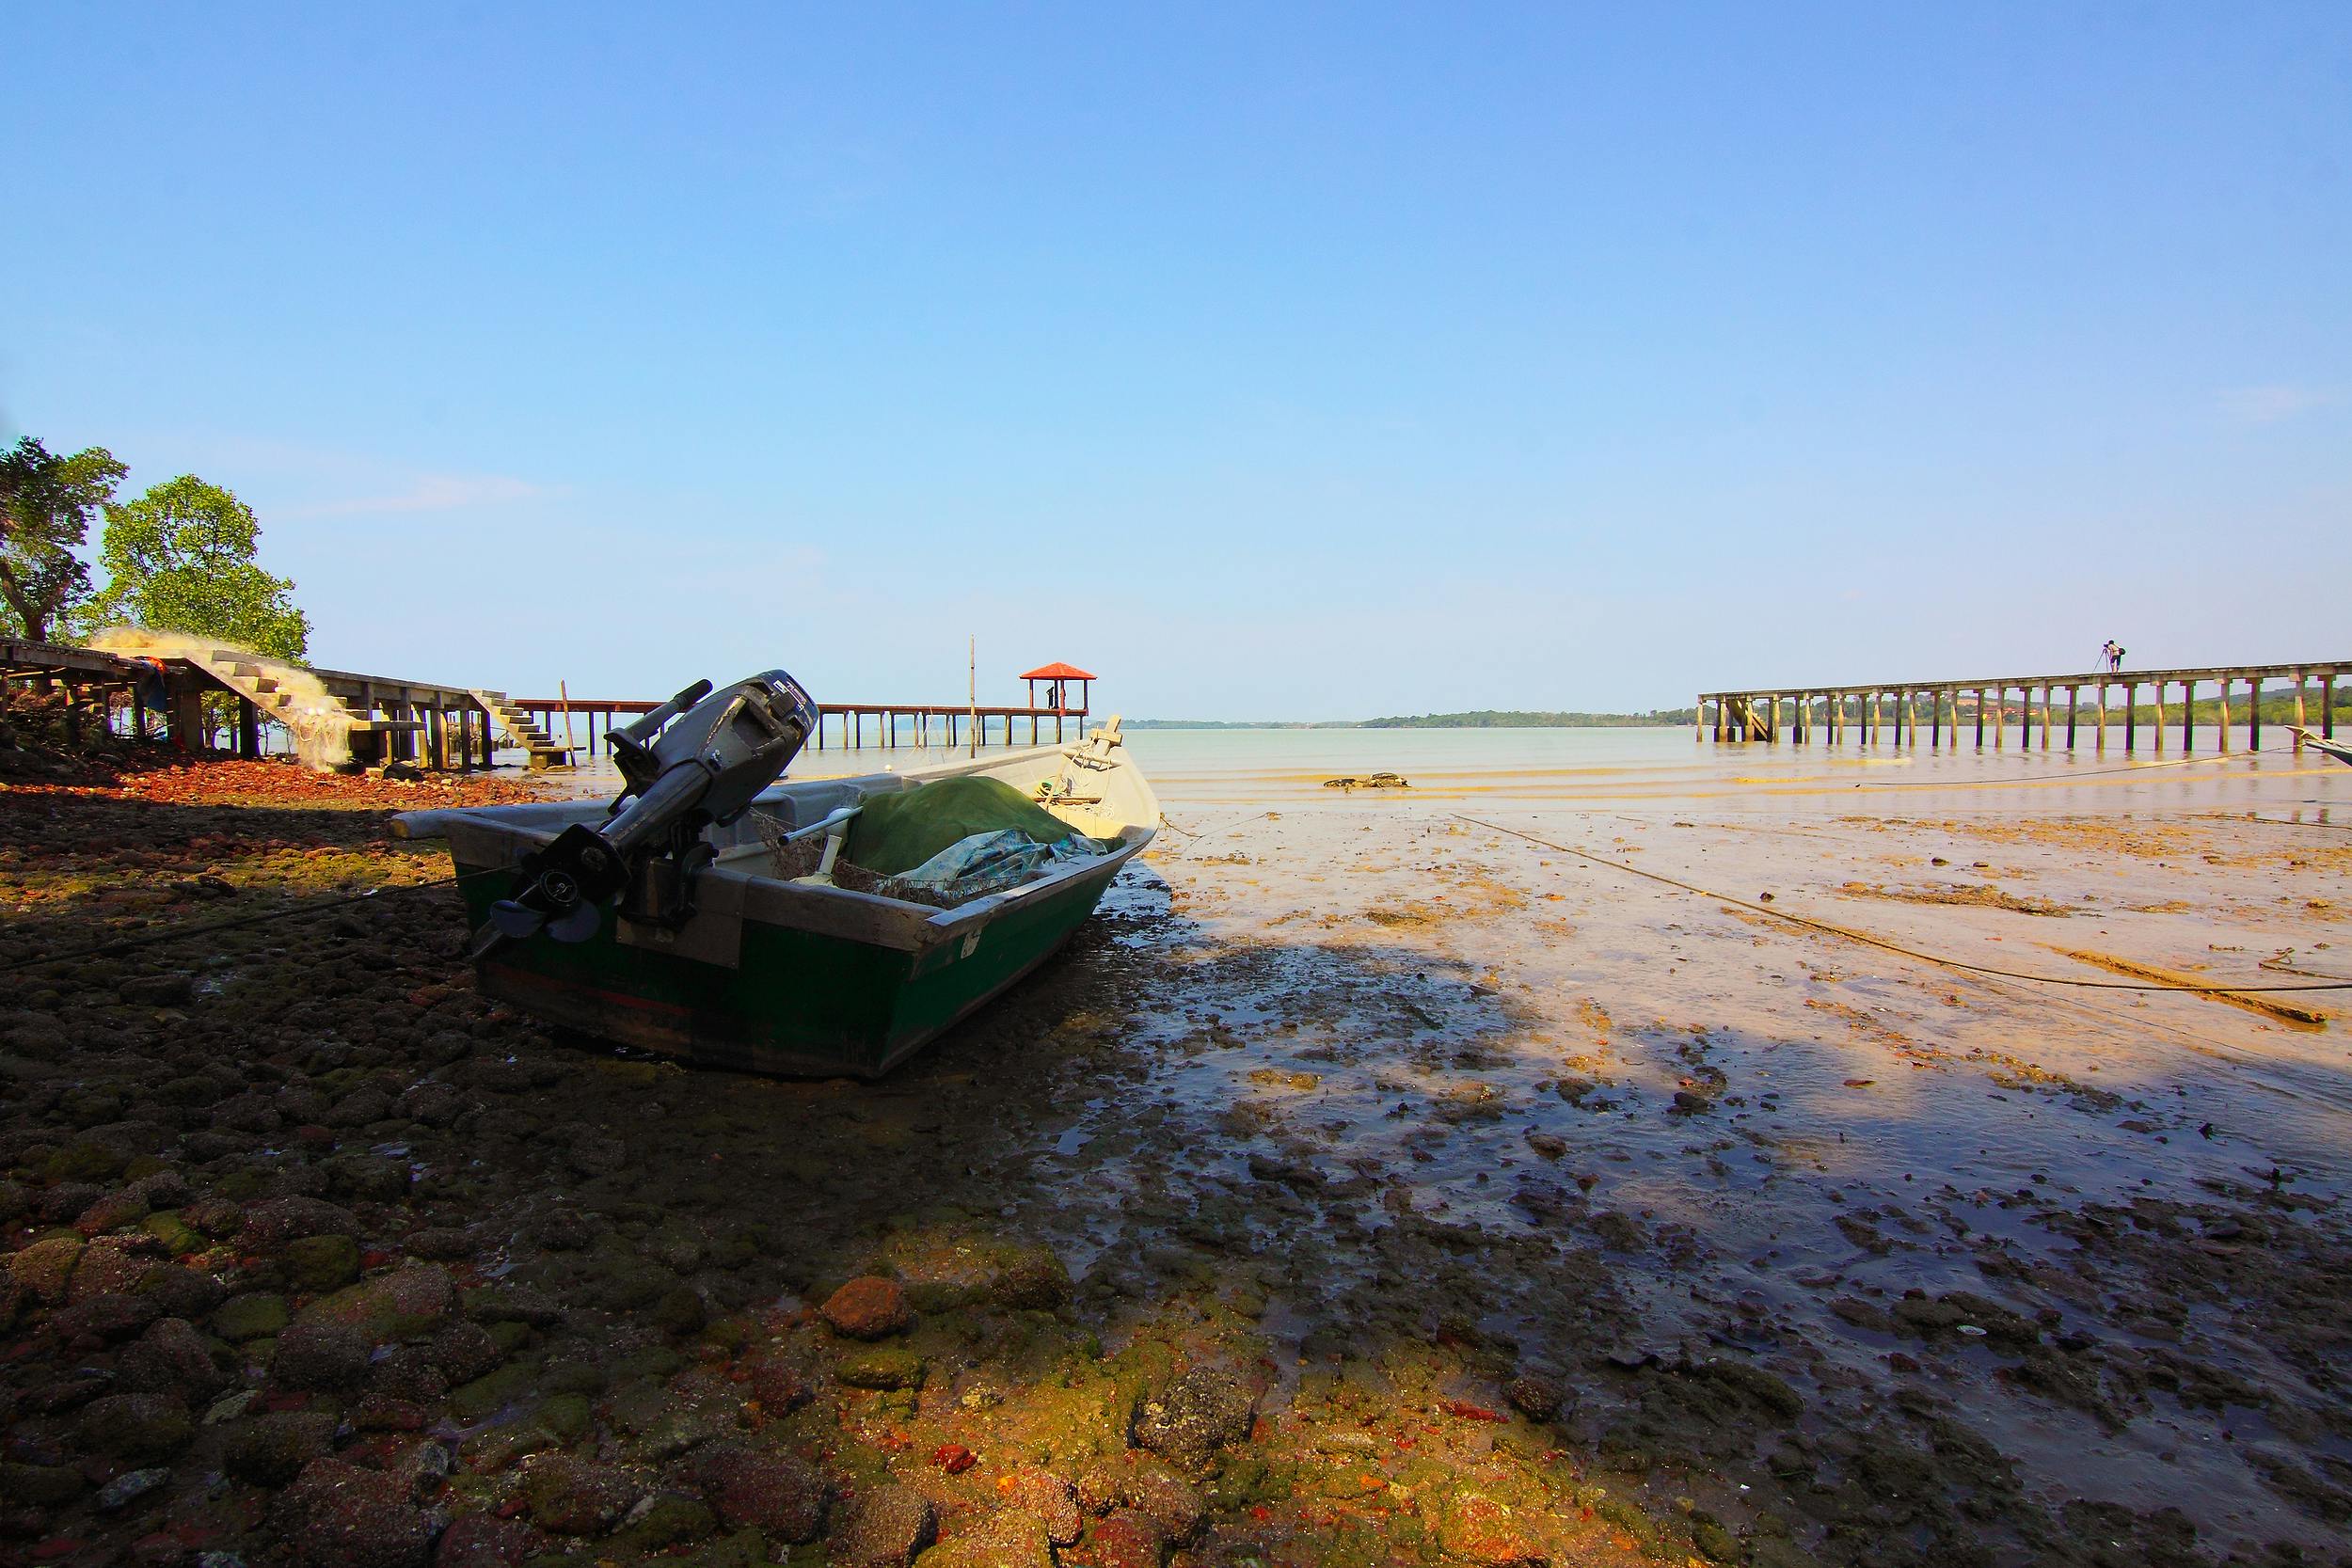 Boat With Outboard Motor on Seashore during Low Tide \u00b7 Free Stock Photo